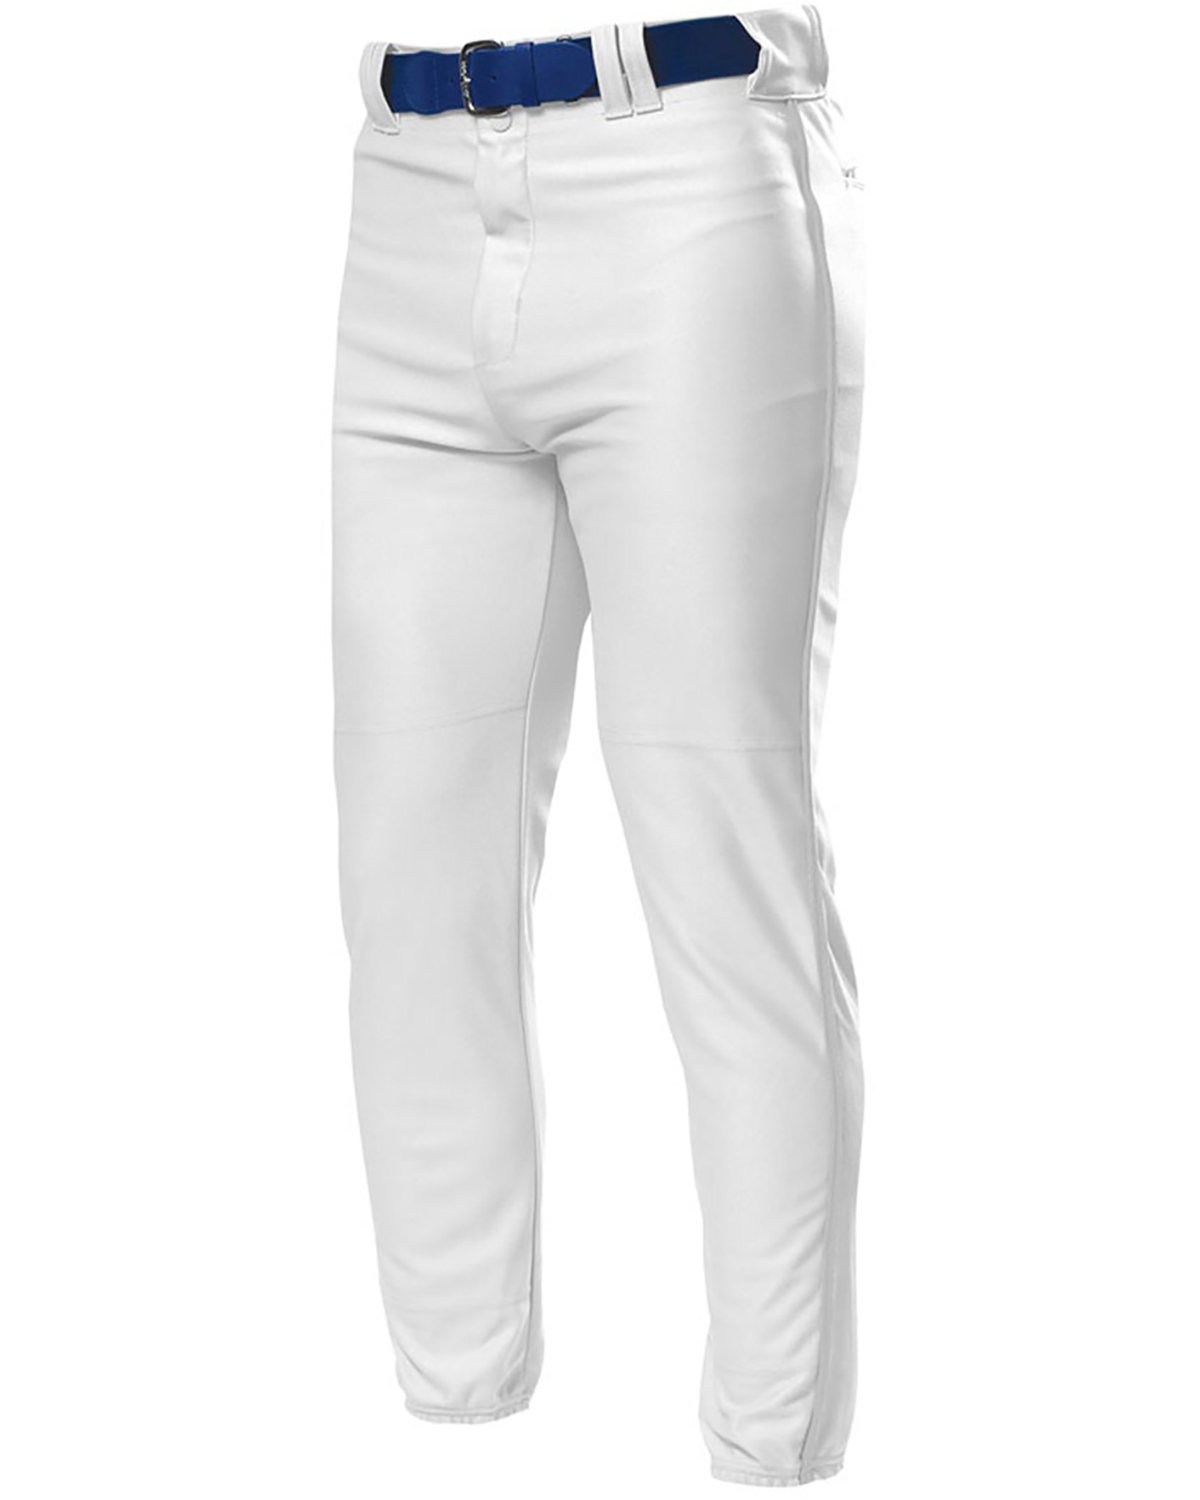 Buy Pro Style Elastic Bottom Baseball Pants - A4 Online at Best price